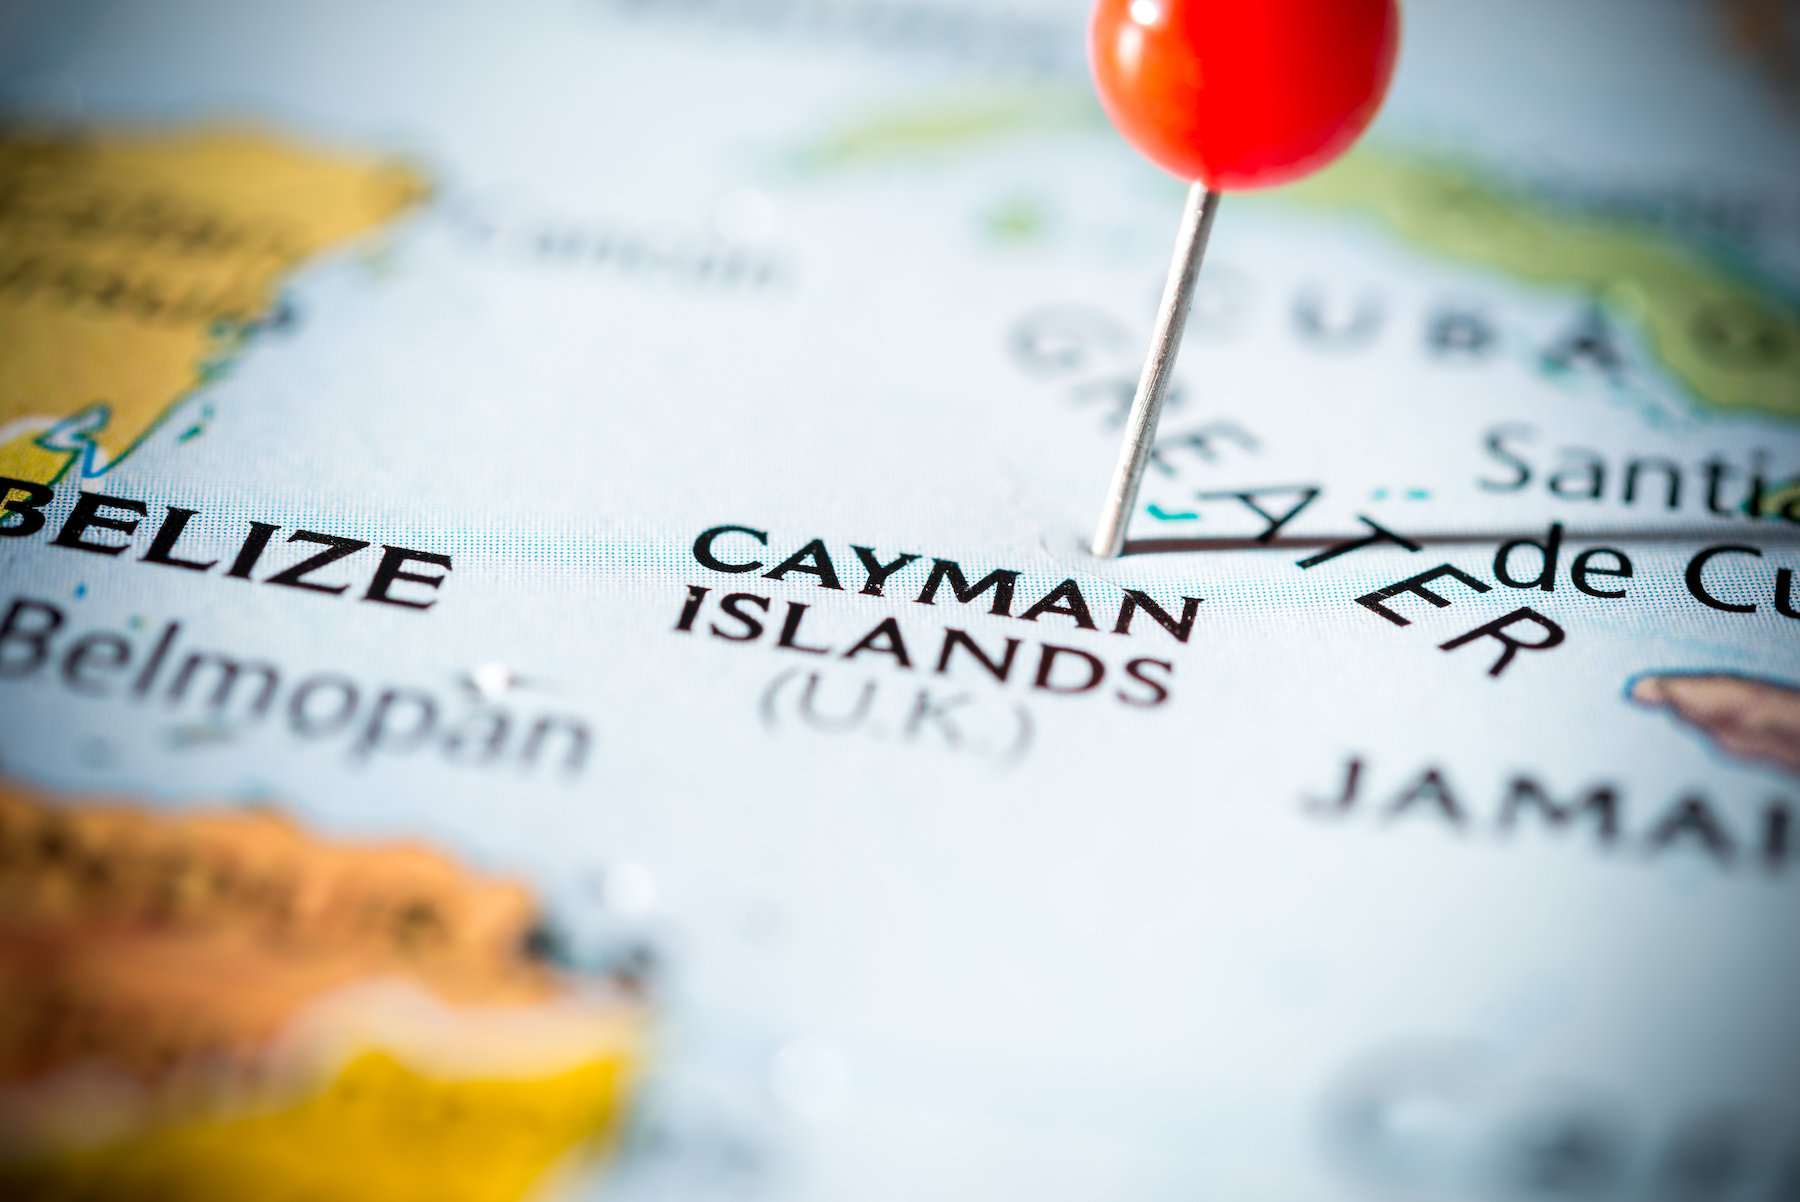 Cayman Islands Discovery Day – celebrating over 500 years of culture, history, tradition and cuisine